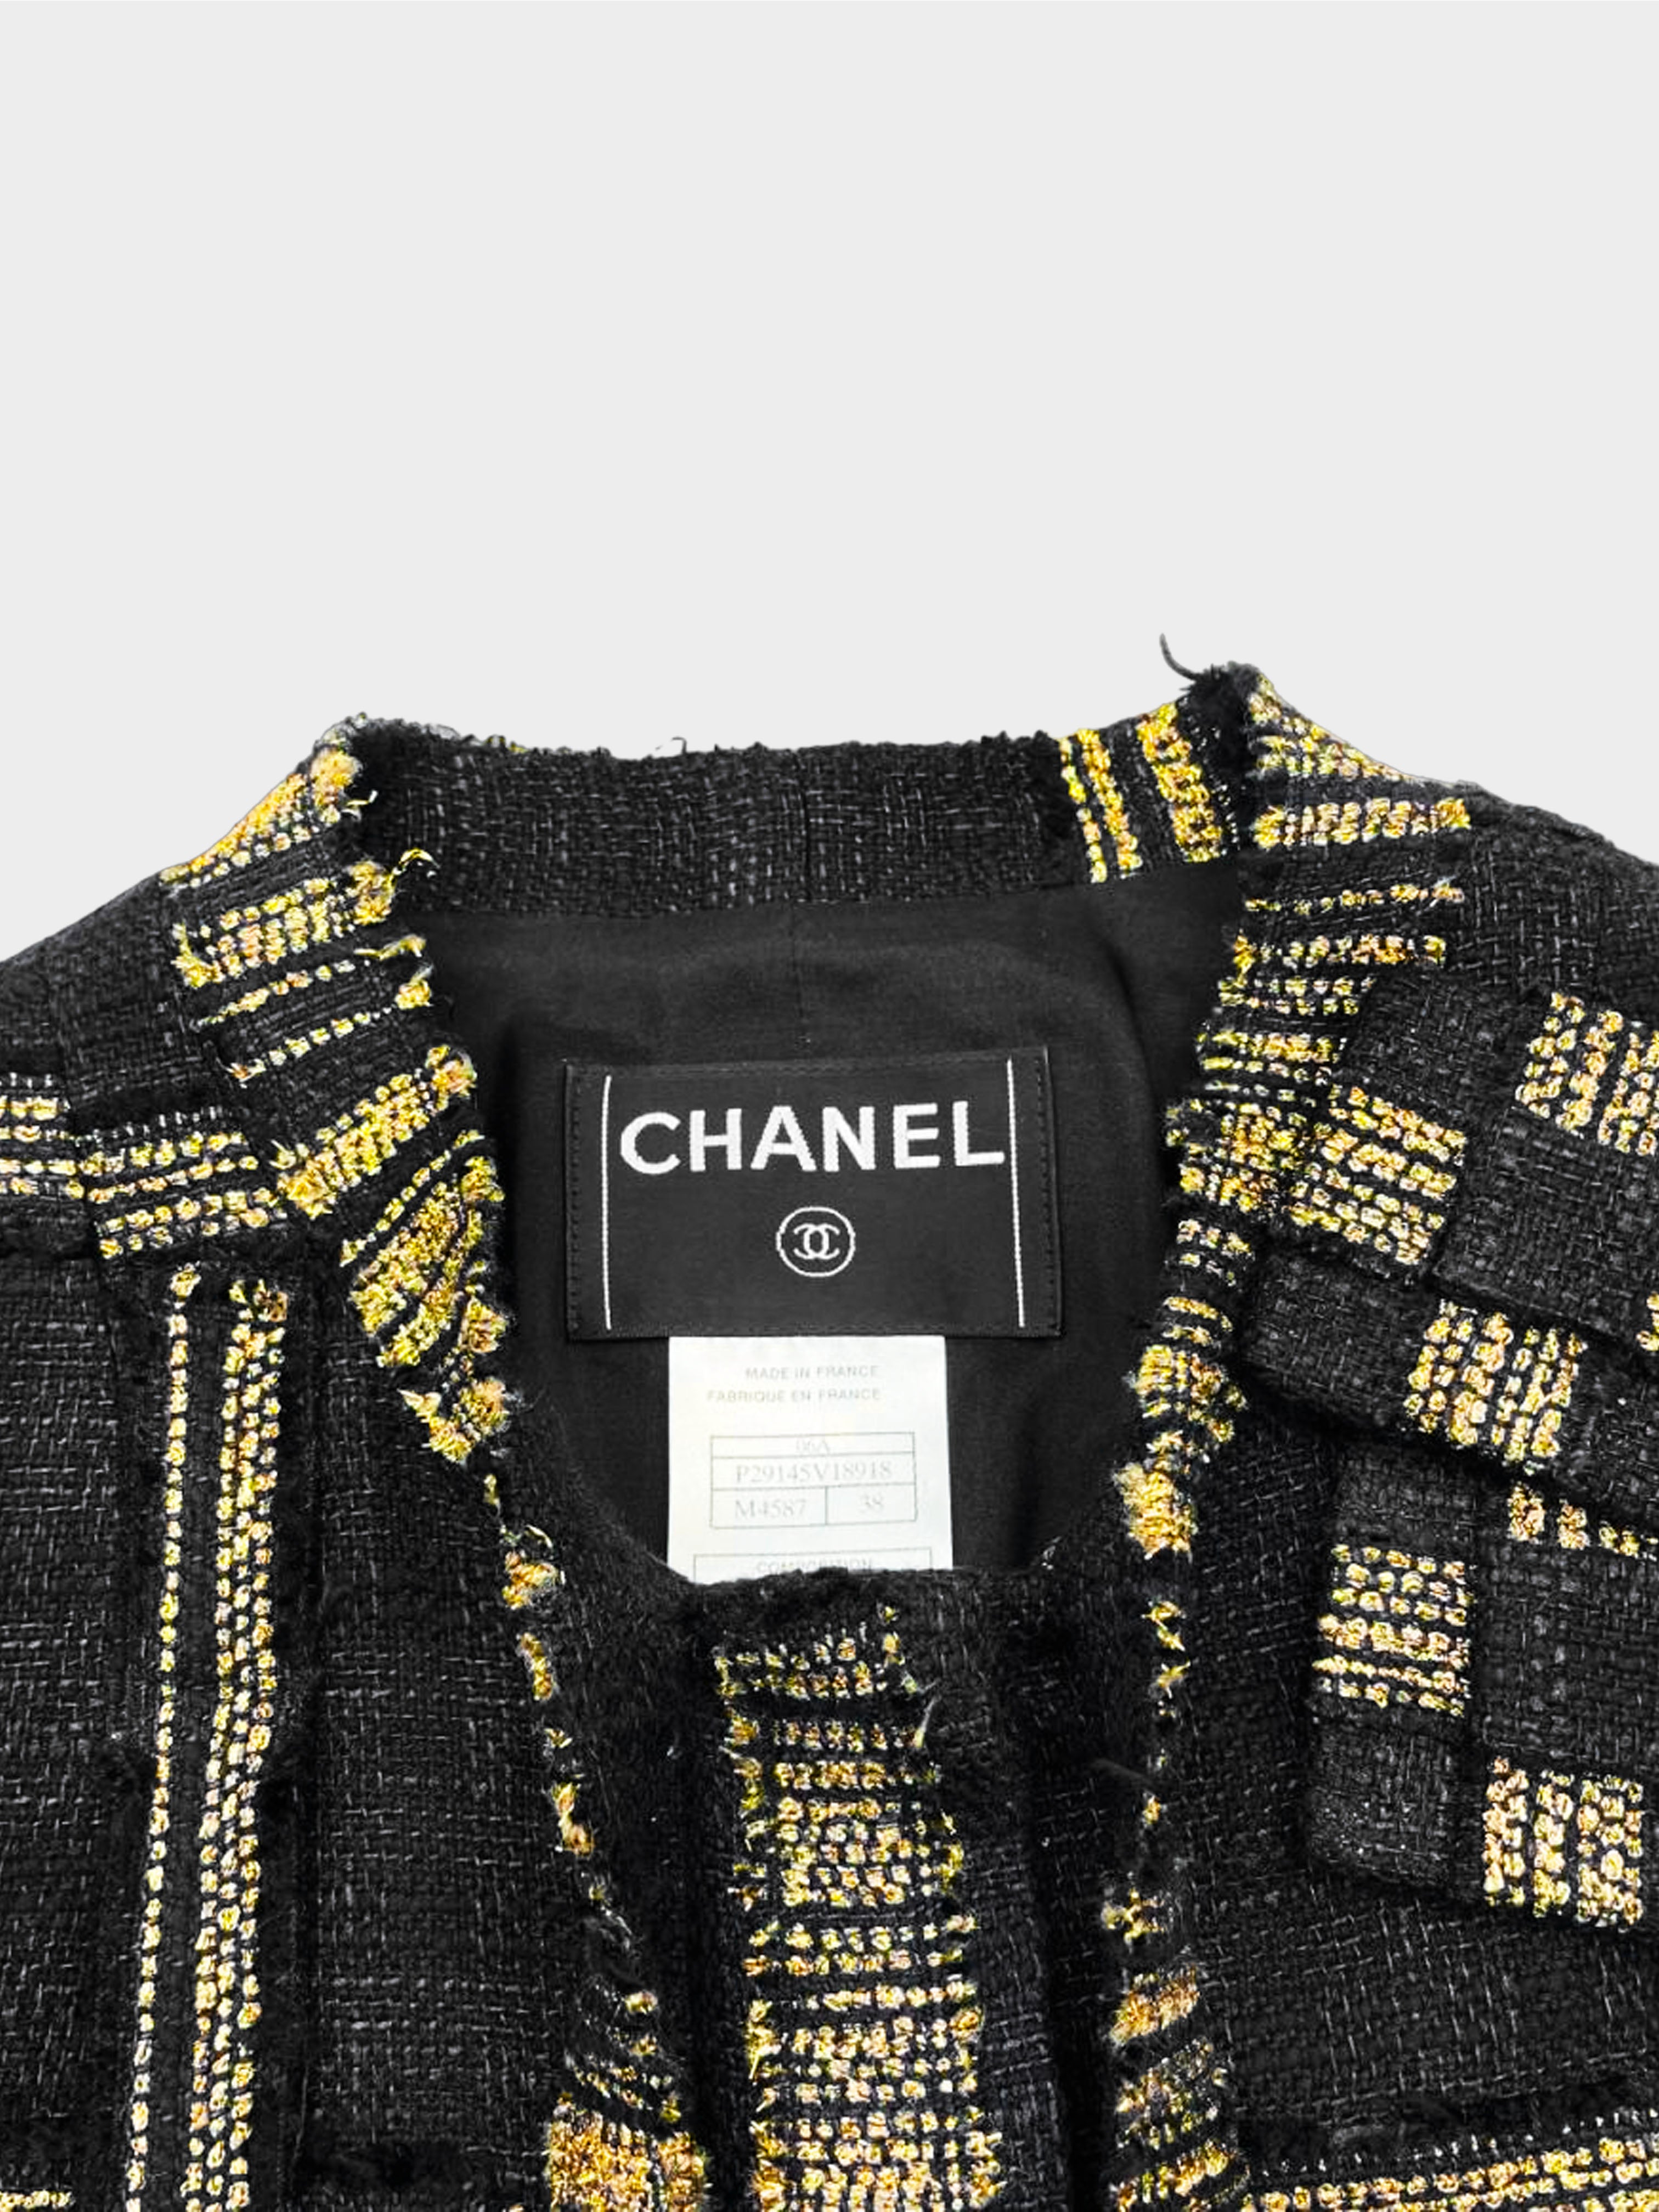 Chanel Fall 2006 Black and Gold Tweed Suit